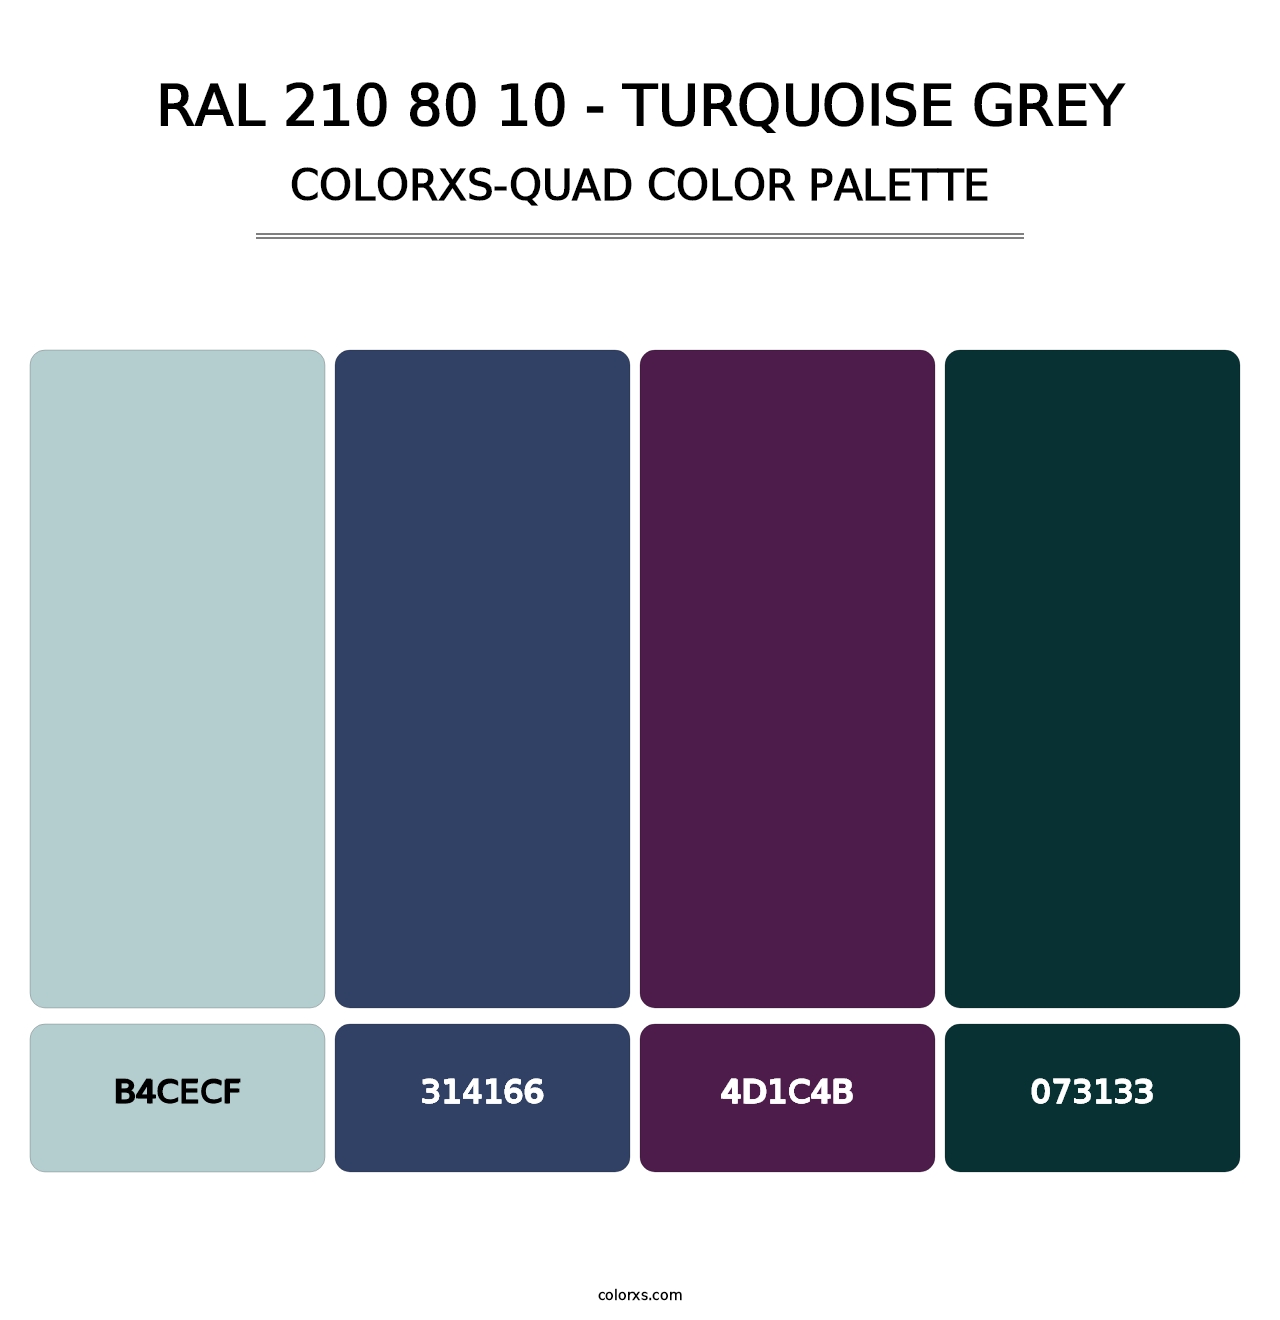 RAL 210 80 10 - Turquoise Grey - Colorxs Quad Palette